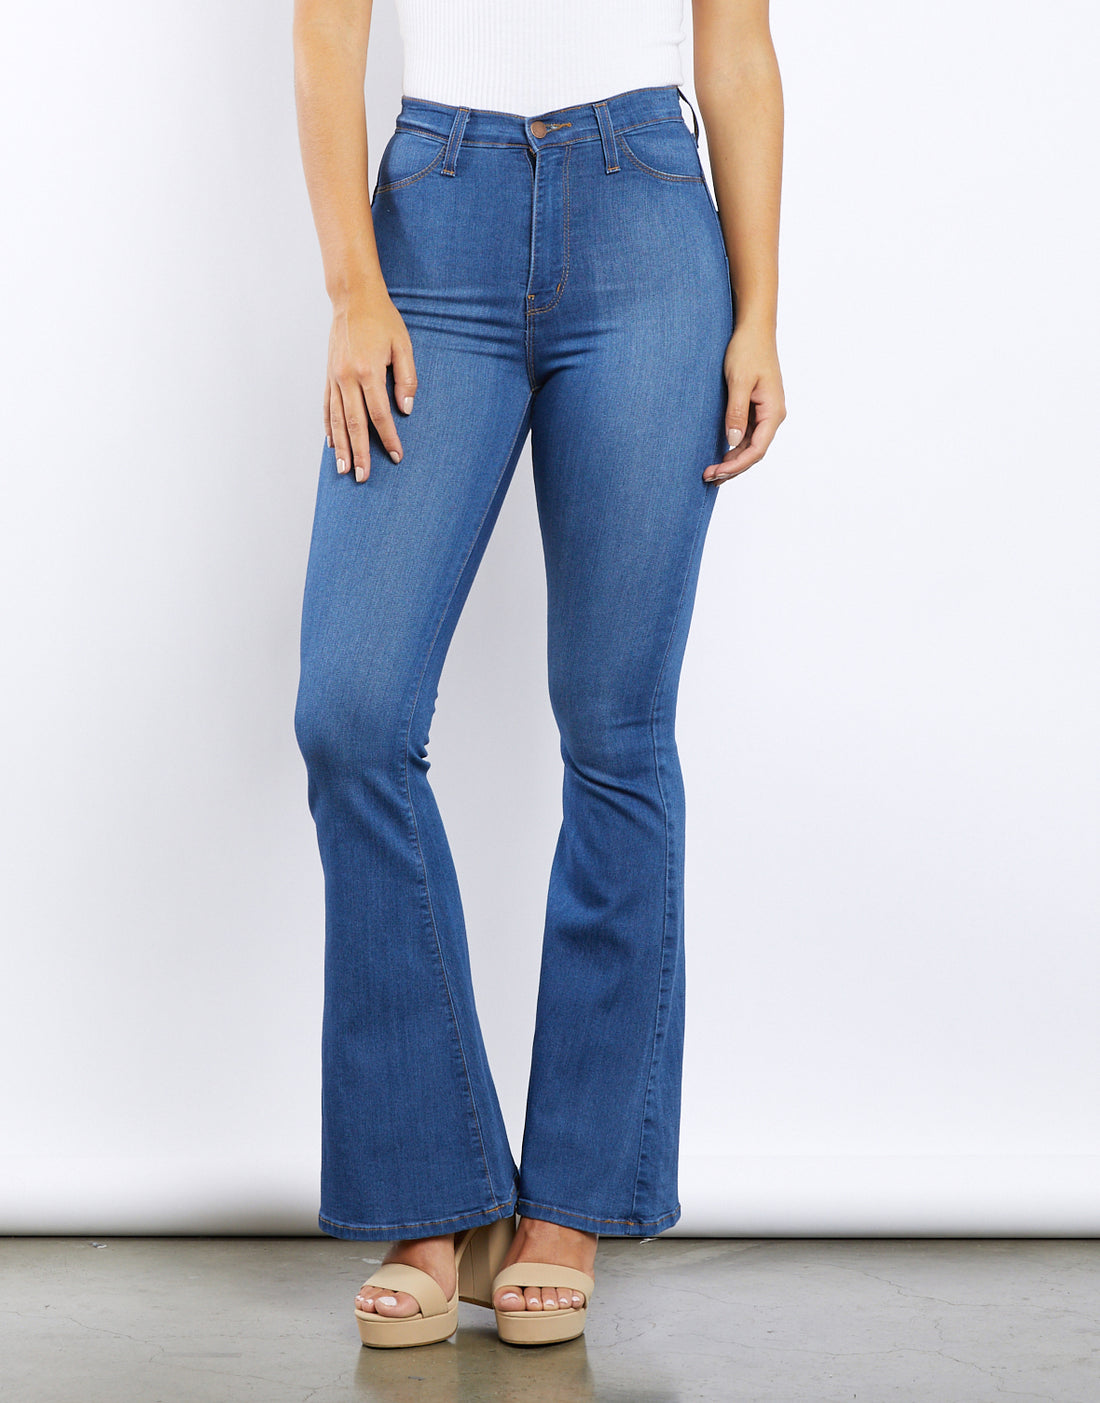 Stretch Flare Jeans Bottoms -2020AVE